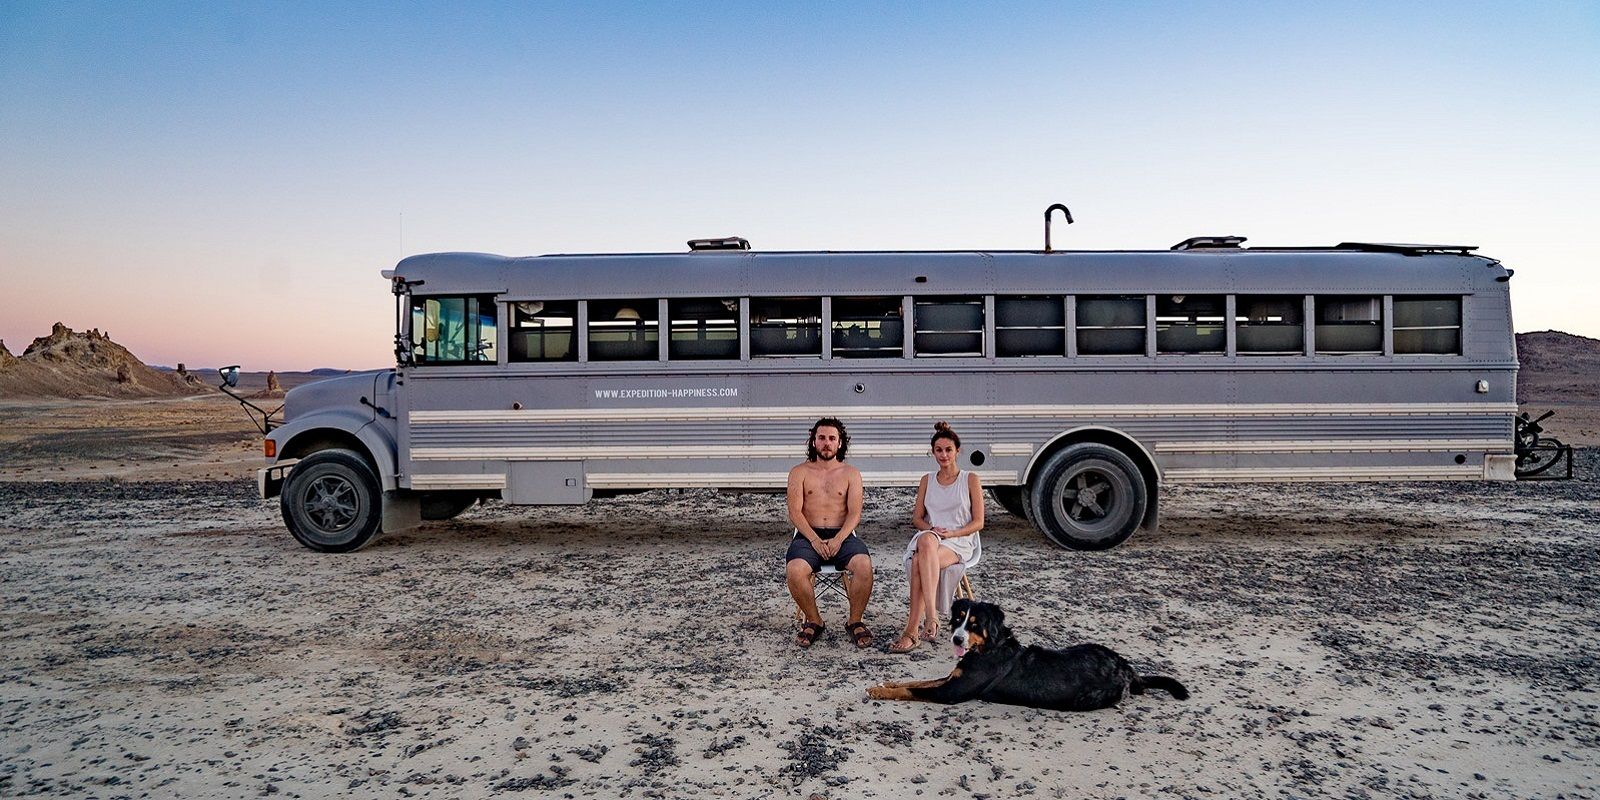 Expedition Happiness - A bus on the beach